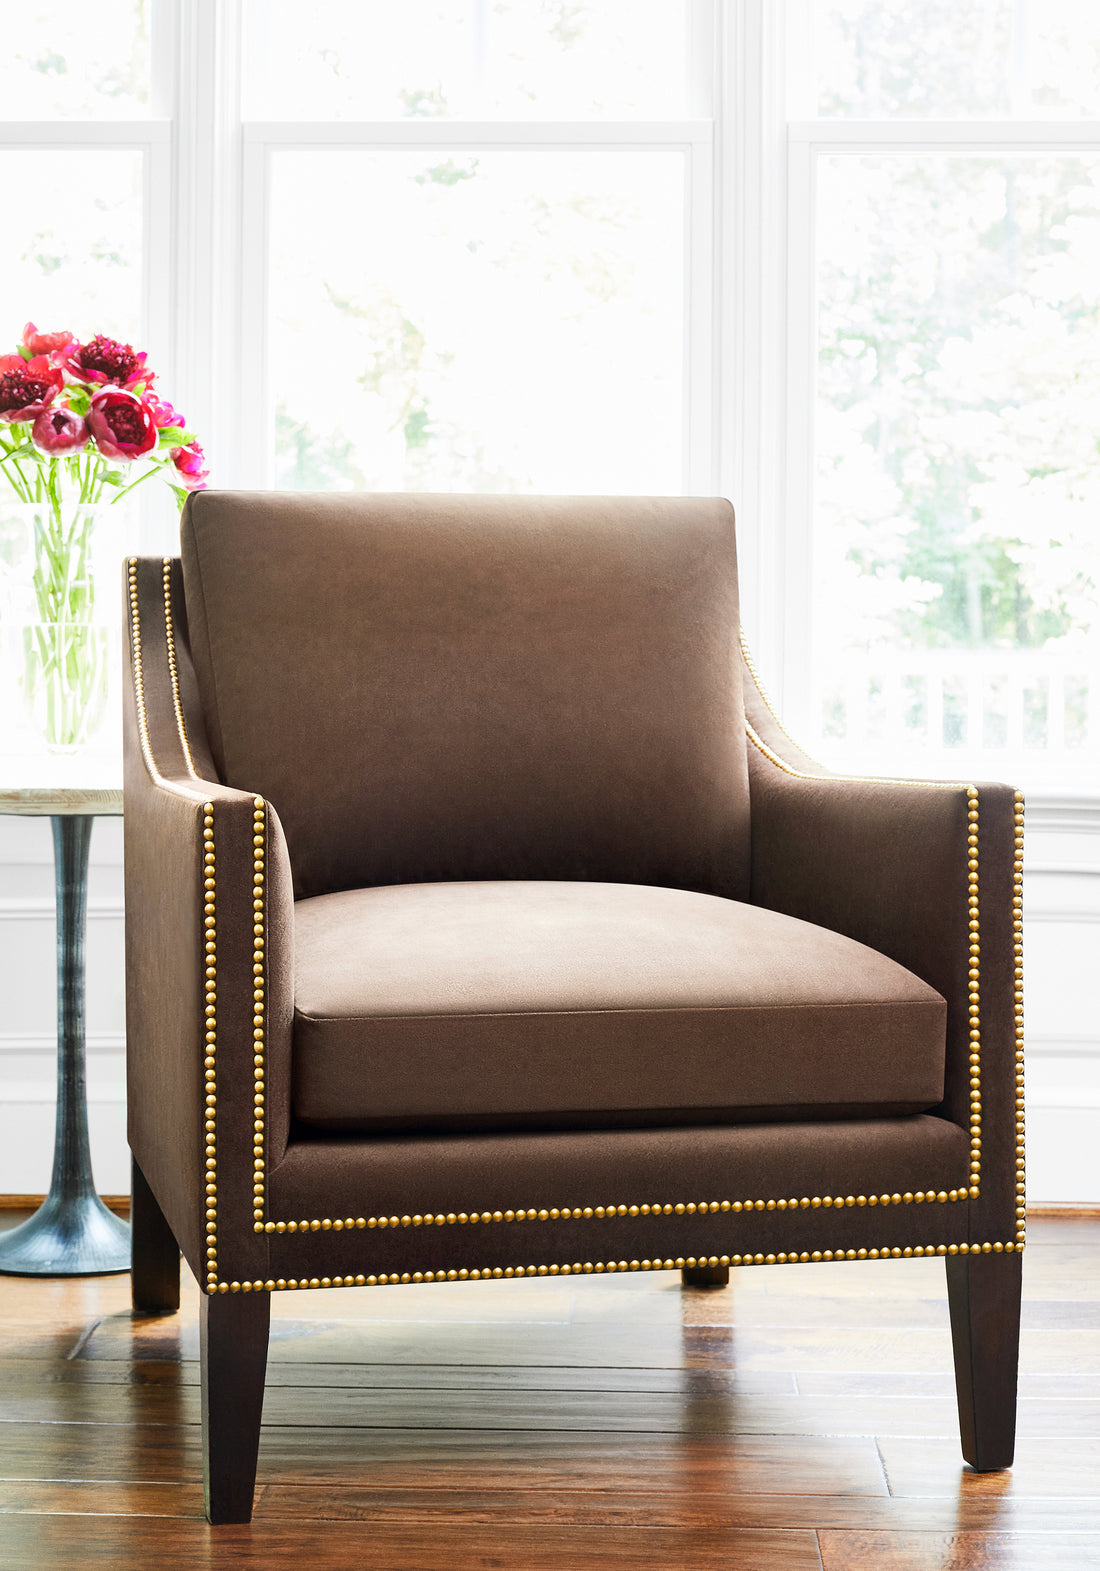 Westwood Chair in Club Velvet sustainable woven fabric in espresso color - pattern number W7227 by Thibaut in the Club Velvet collection